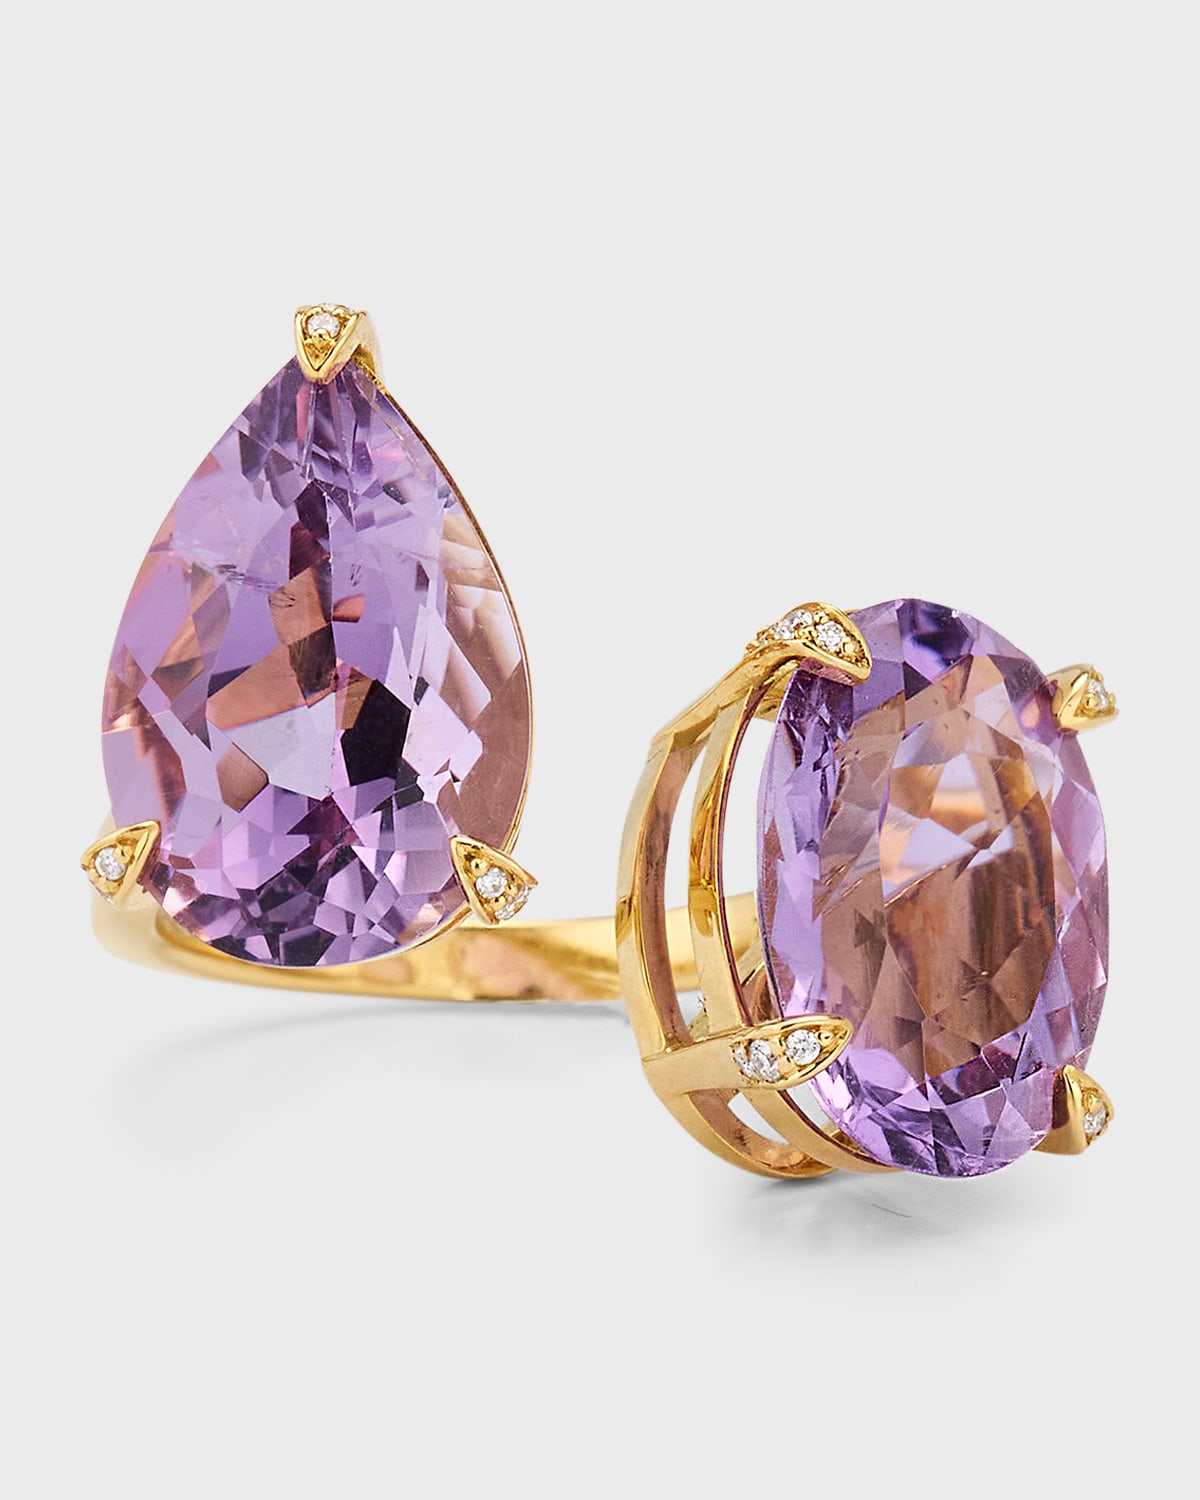 18K Yellow Gold Oval and Pear Shaped Amethyst Ring with Round Diamonds, Size 5.5